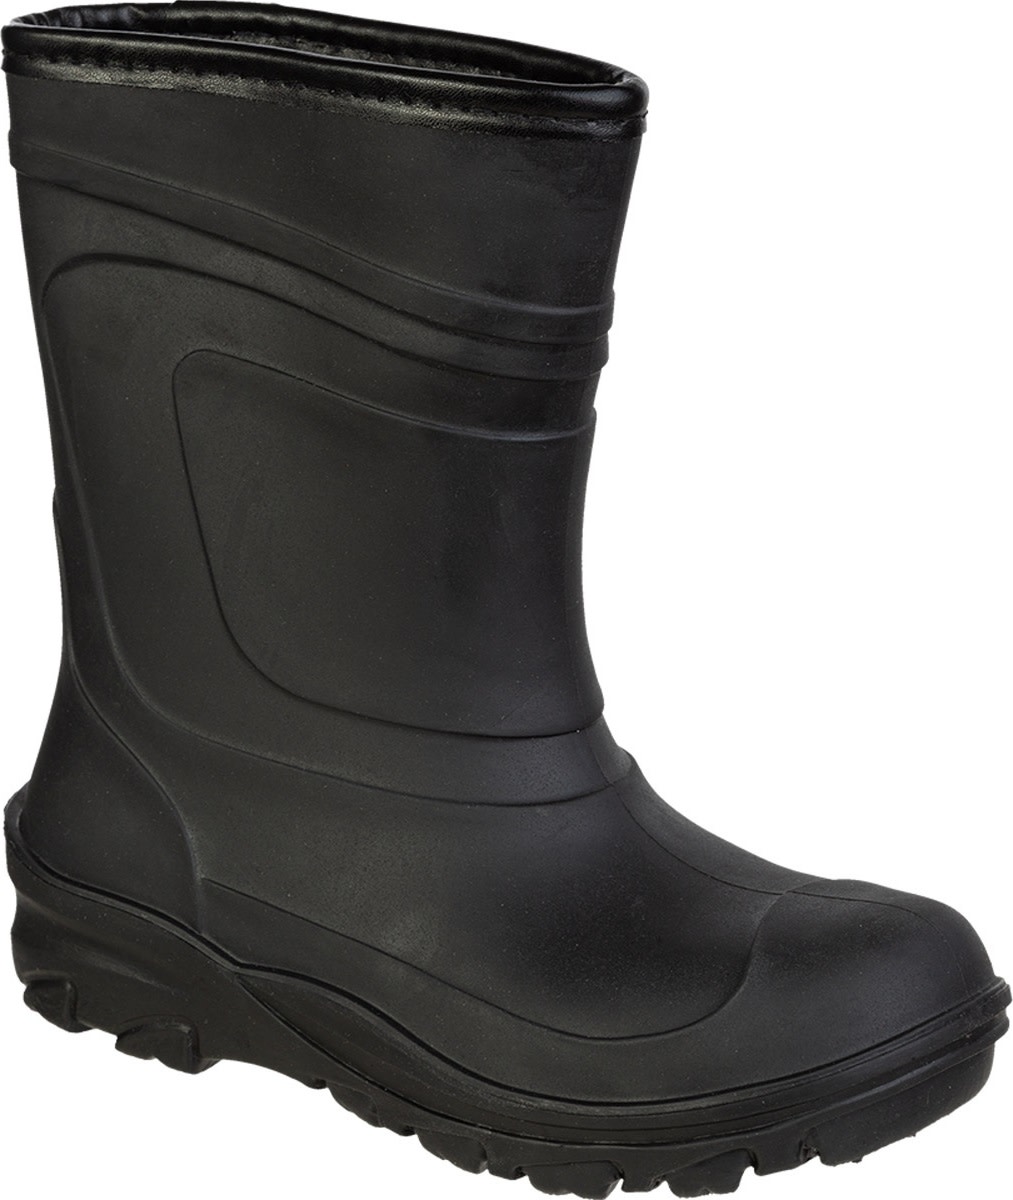 Kids\' FianThermo Boot Black | Outnorth | FianThermo Black Kids\' Boot Buy here